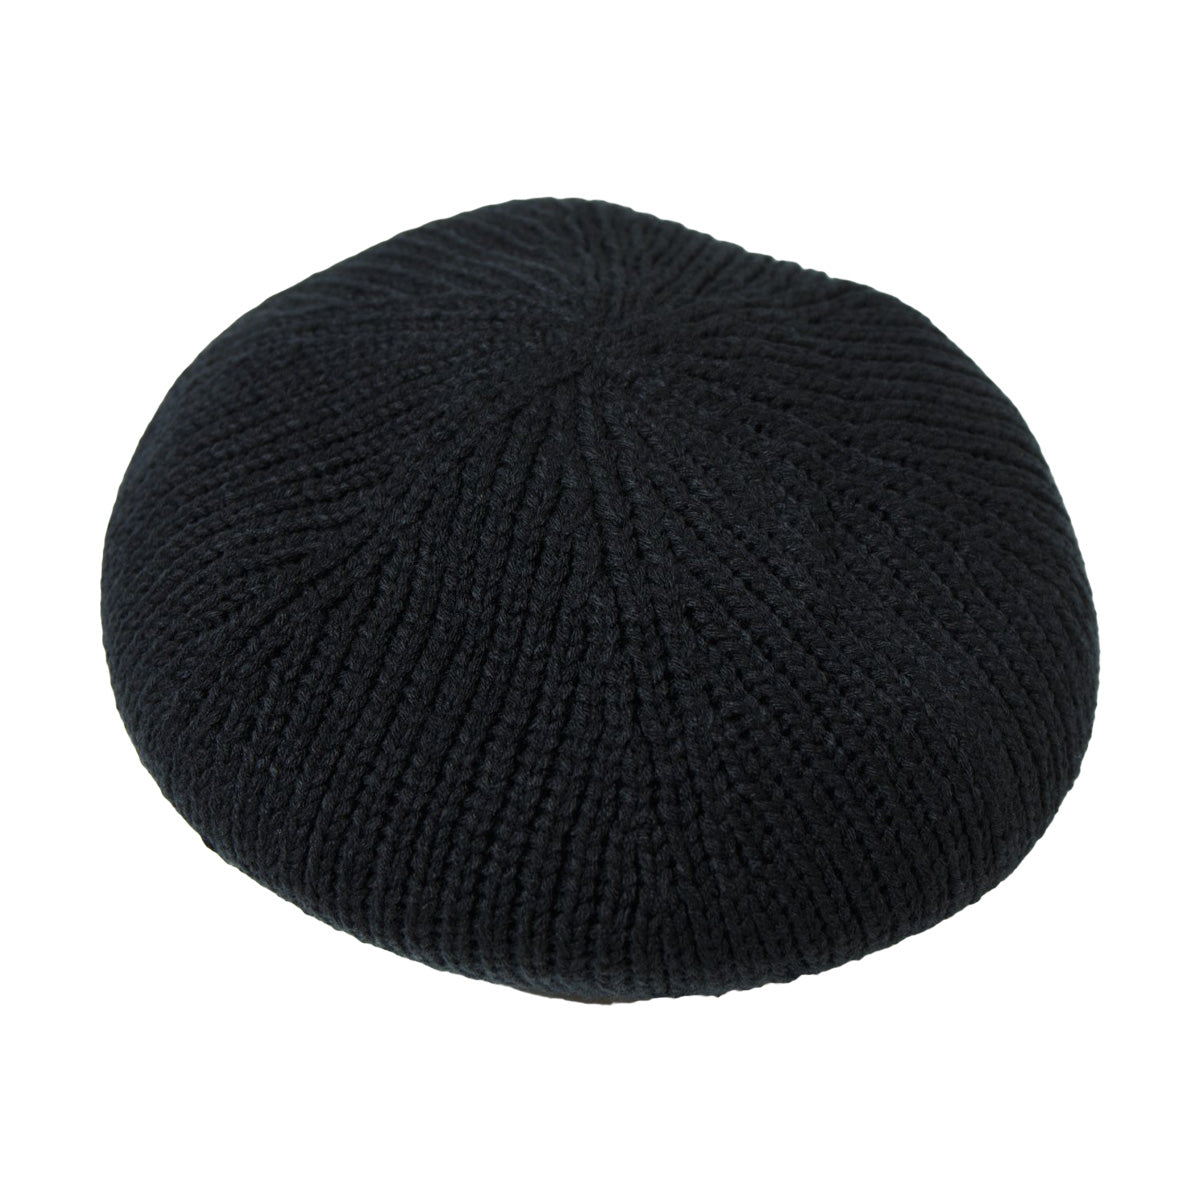 Racal Lowgauge Thermo Beret, Black